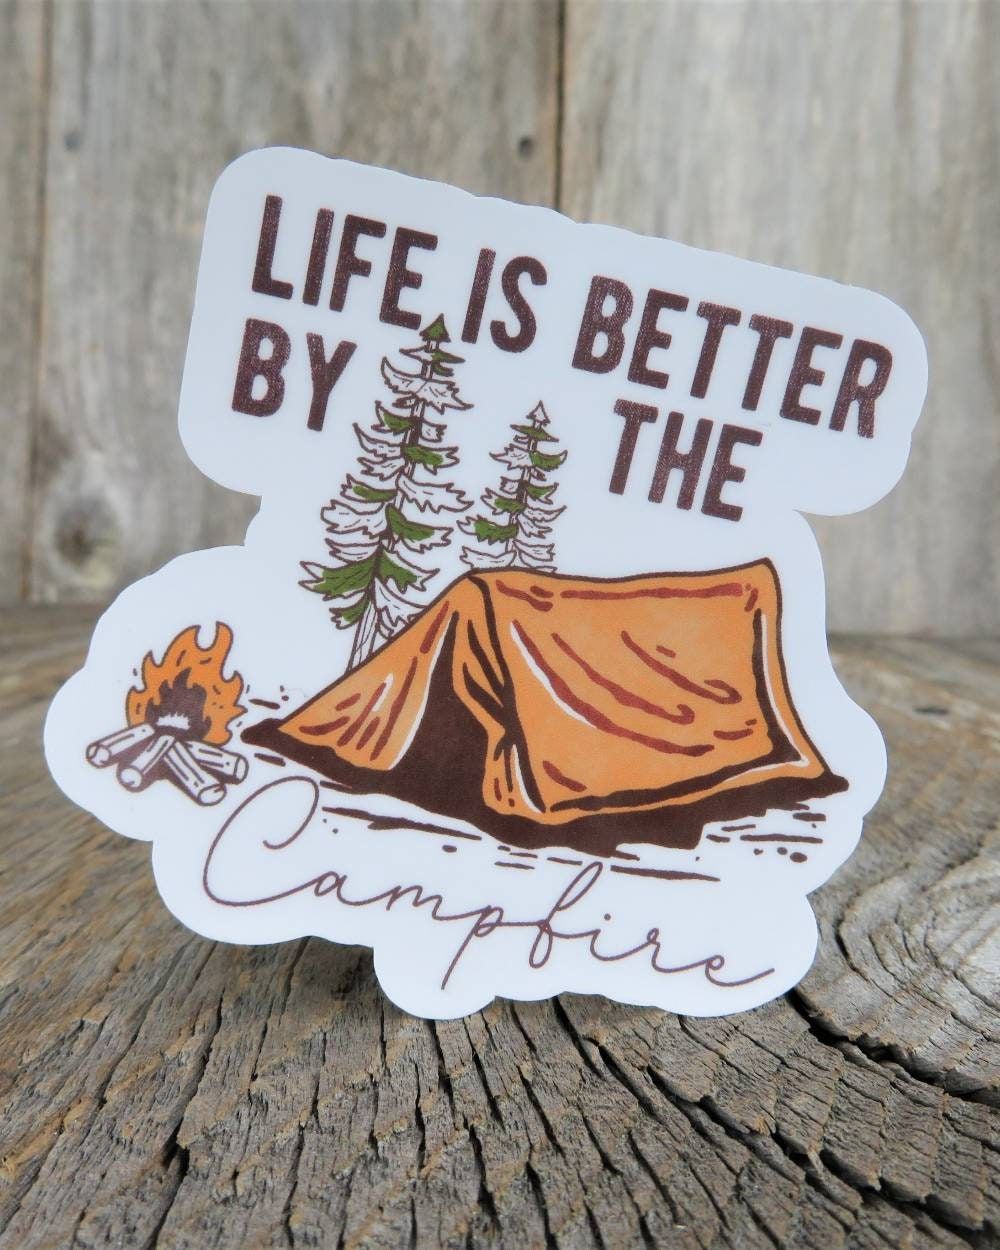 Life is Better By the Campfire Sticker Full Color Waterproof Outdoors Tent Camping Water Bottle Sticker